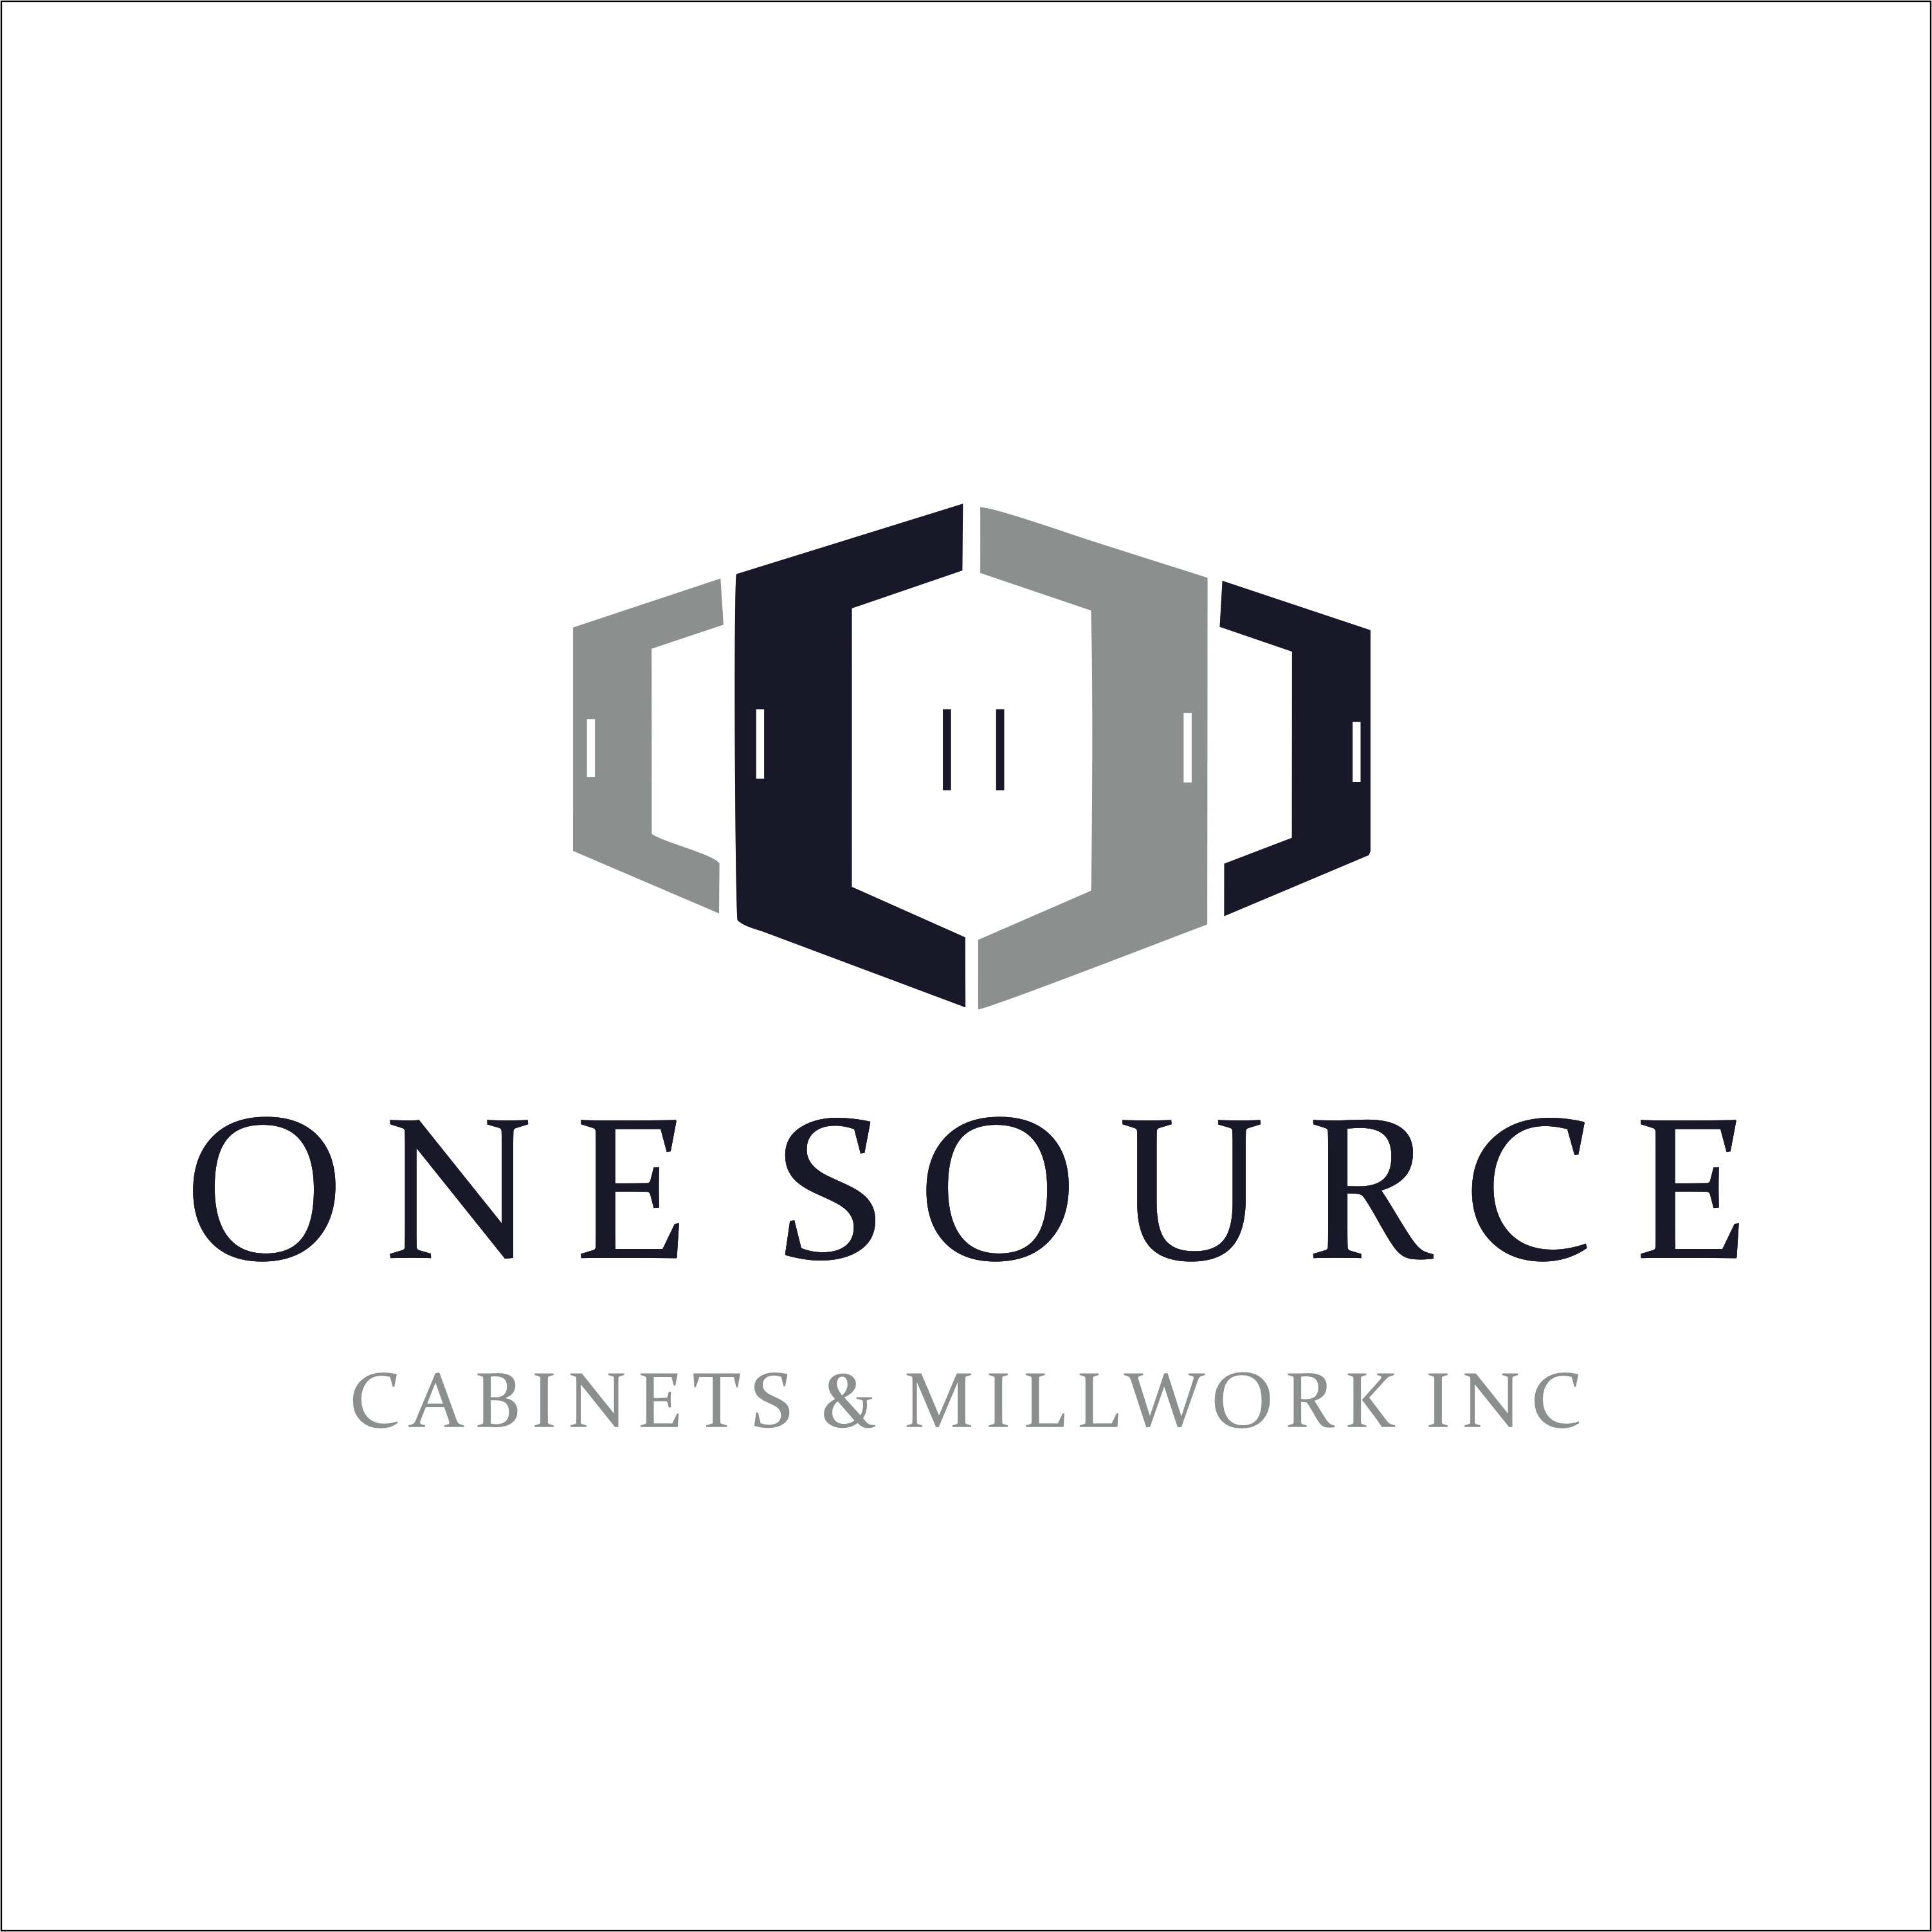 One Source Cabinets & Millwork, Inc. Logo